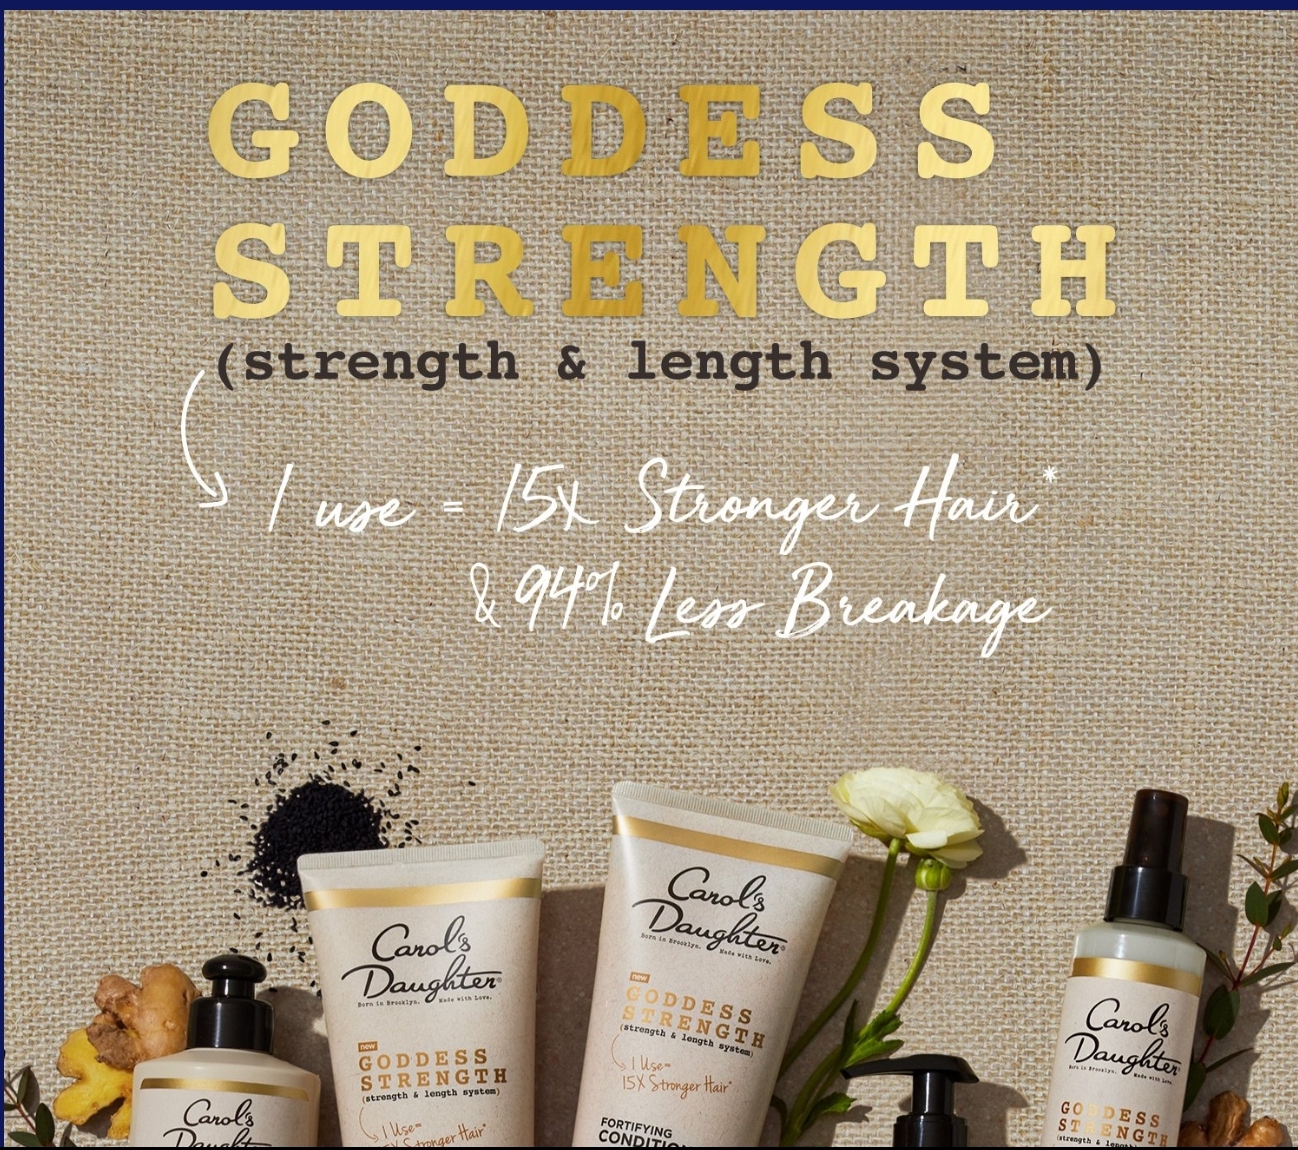 FREE Sample of Carol’s Daughter Goddess Strength Shampoo and Conditioner